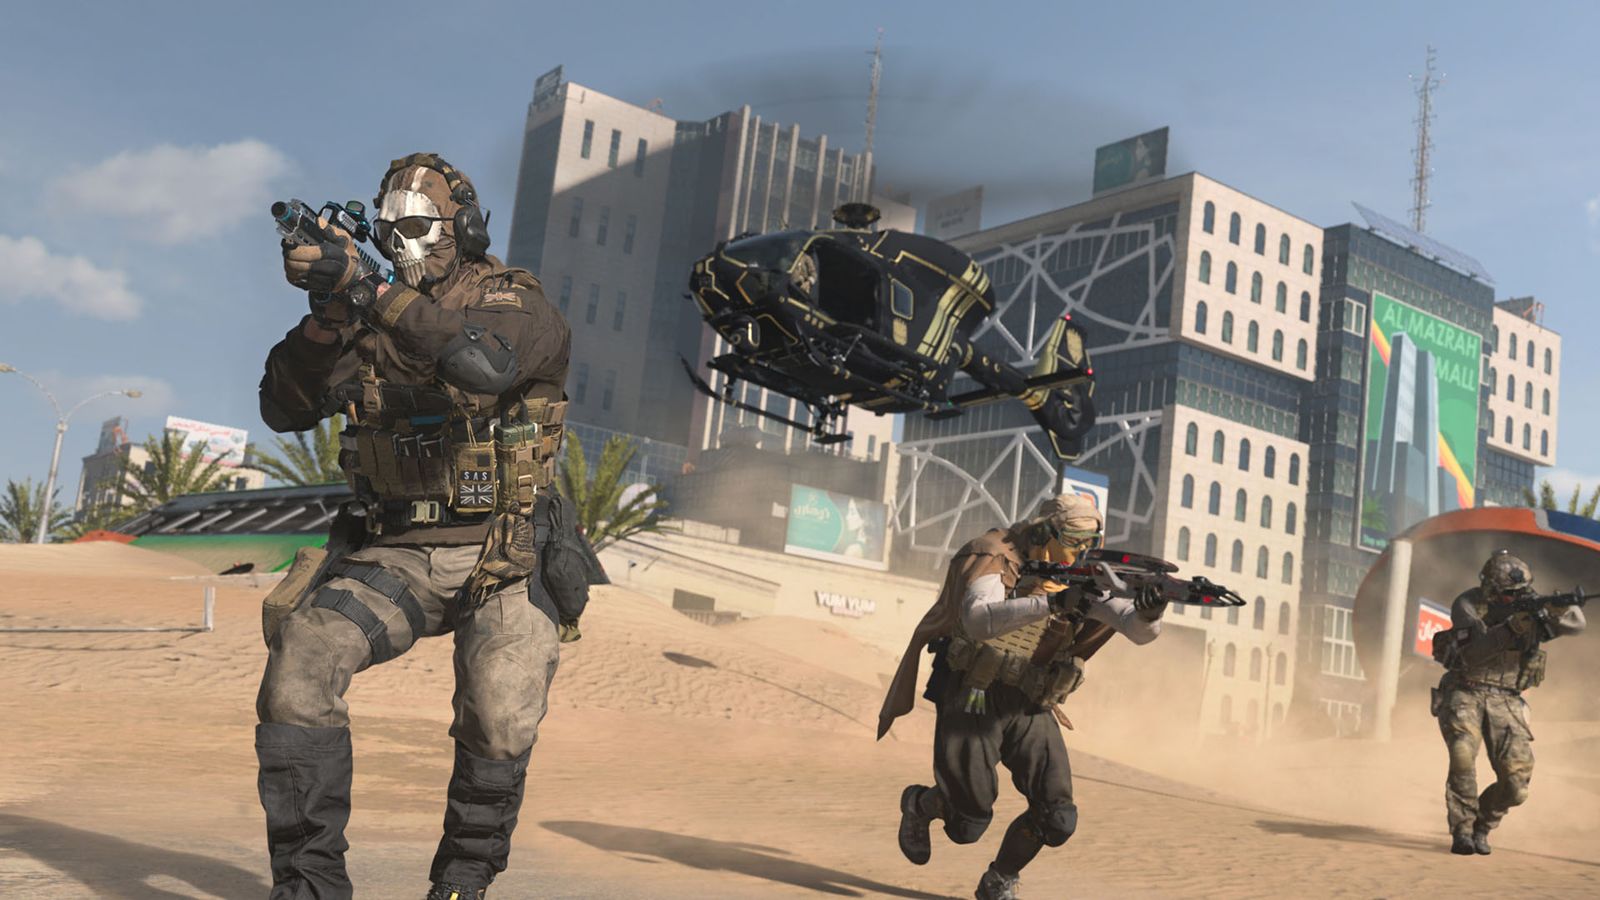 Screenshot of Warzone players walking on sand with helicopter flying in the background